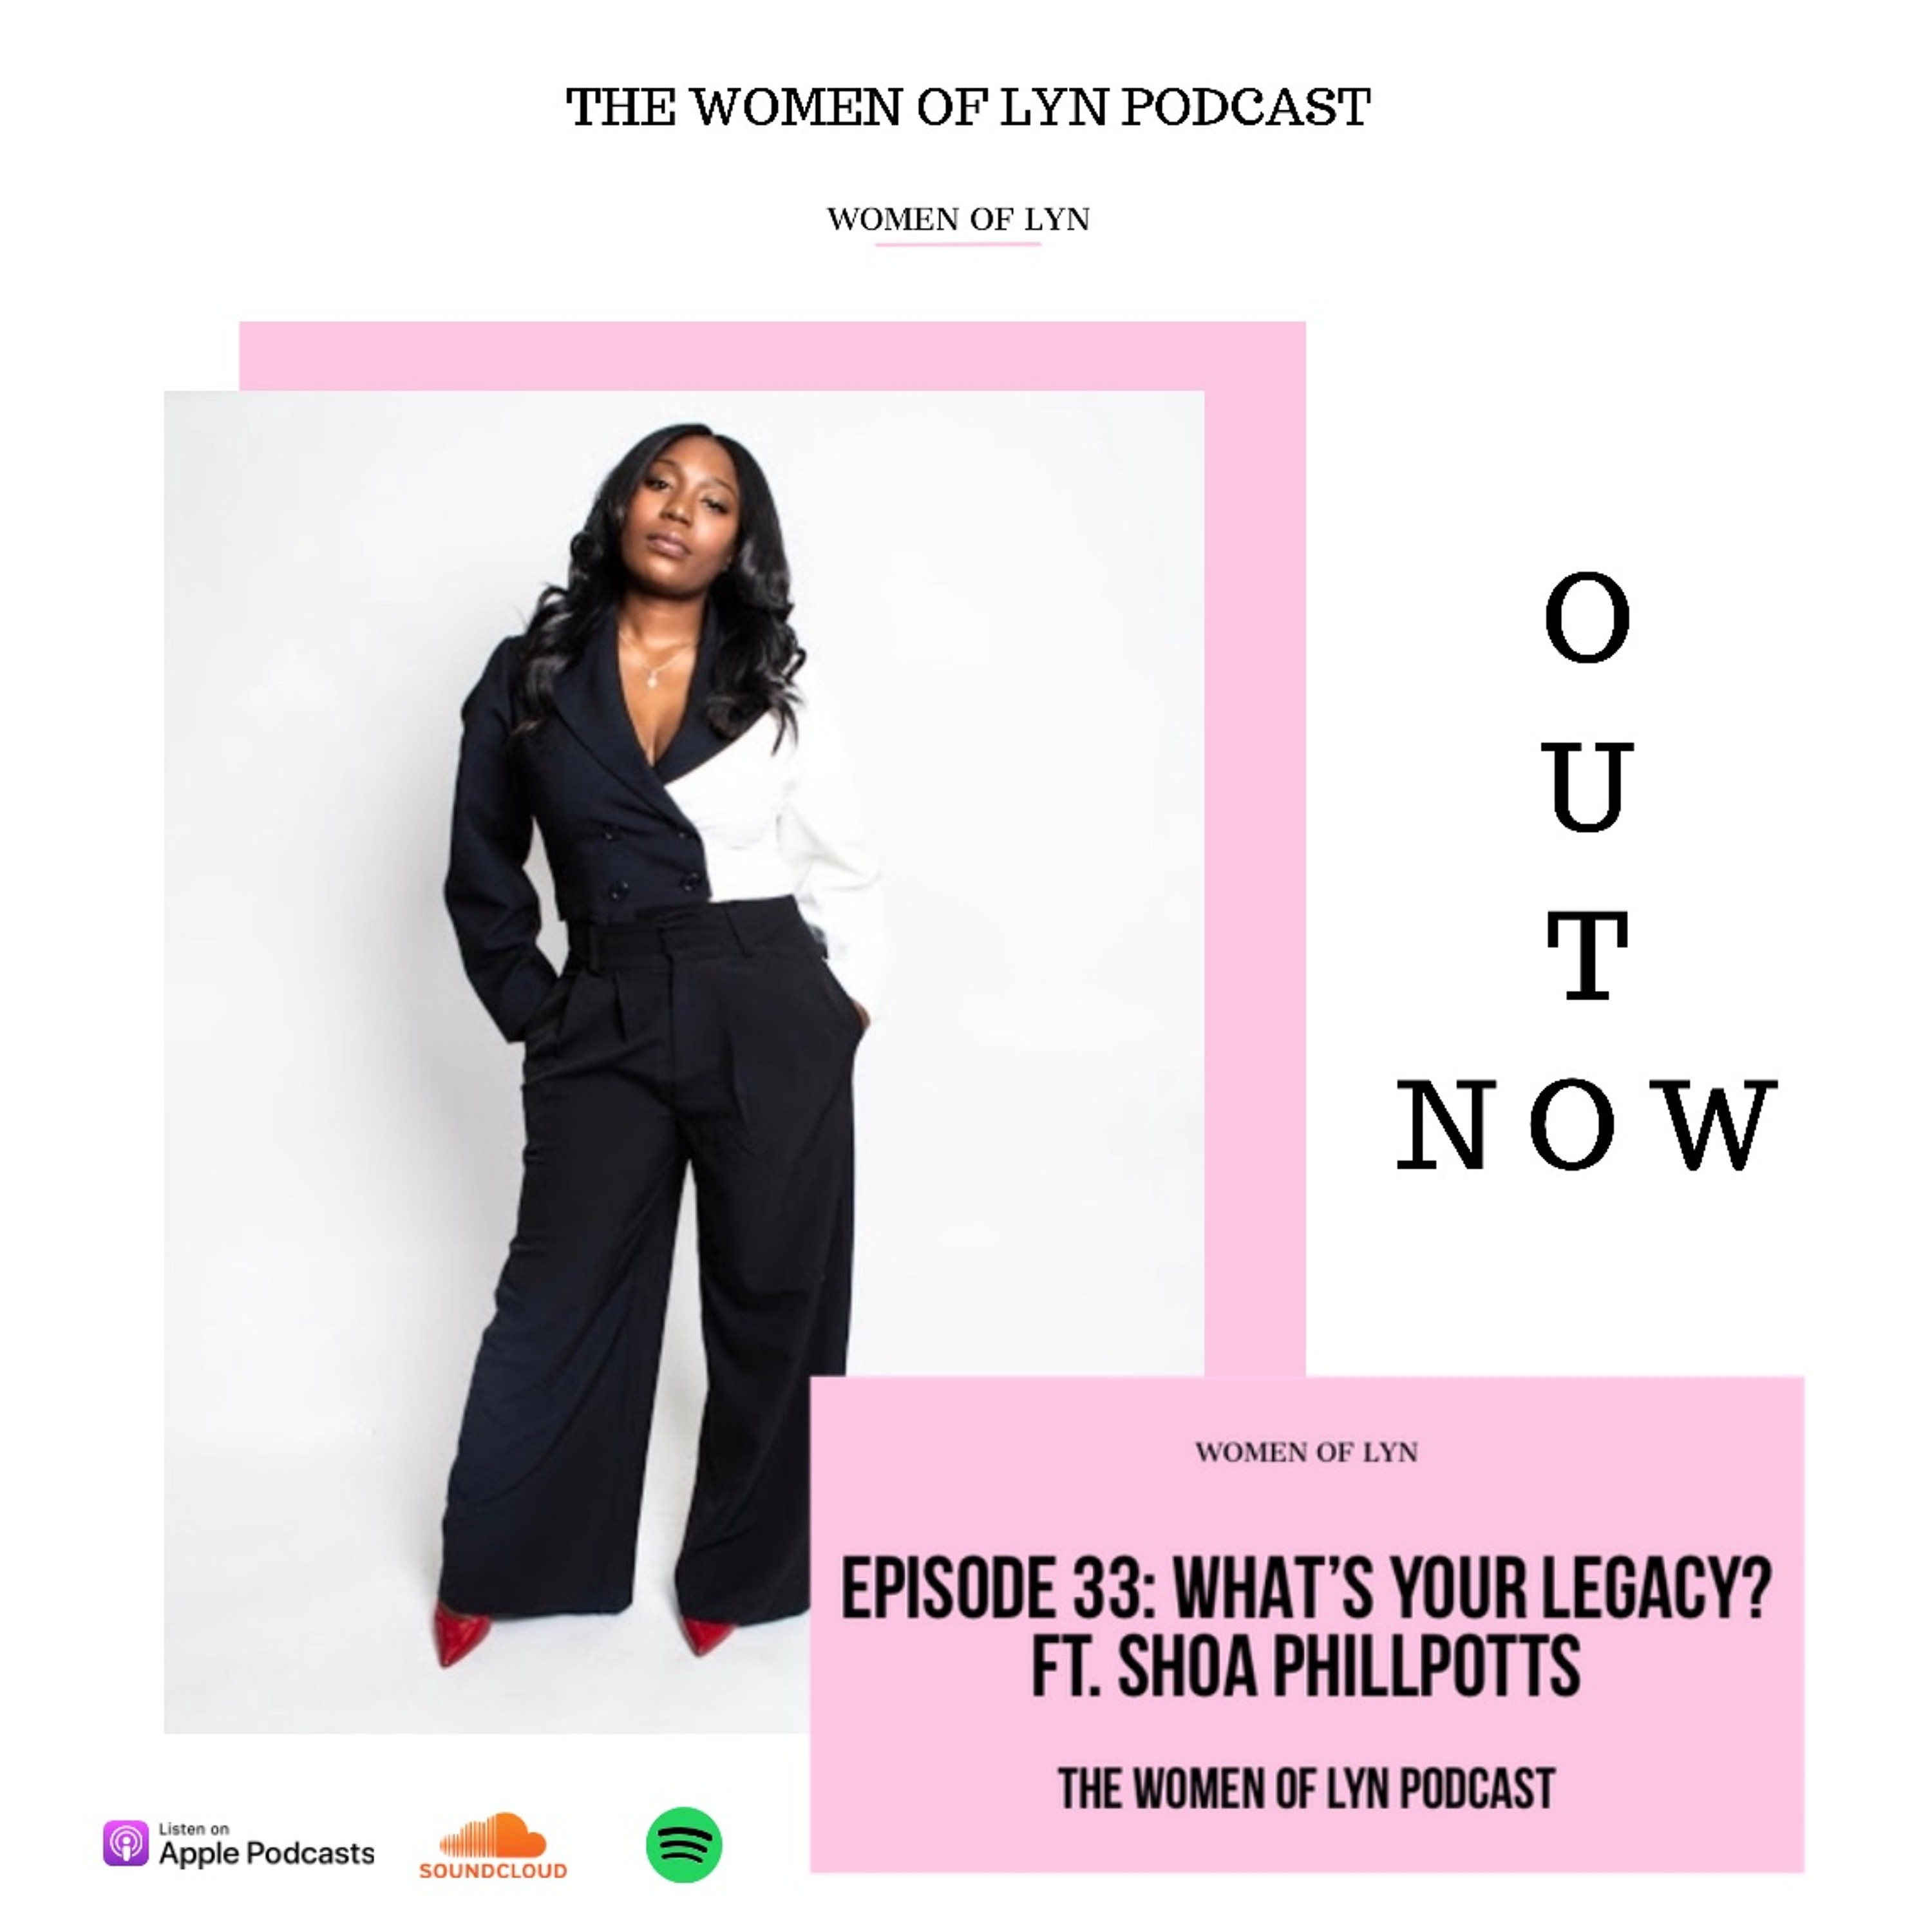 Episode 33: ”What’s Your Legacy?” Ft. Shoa Phillpotts